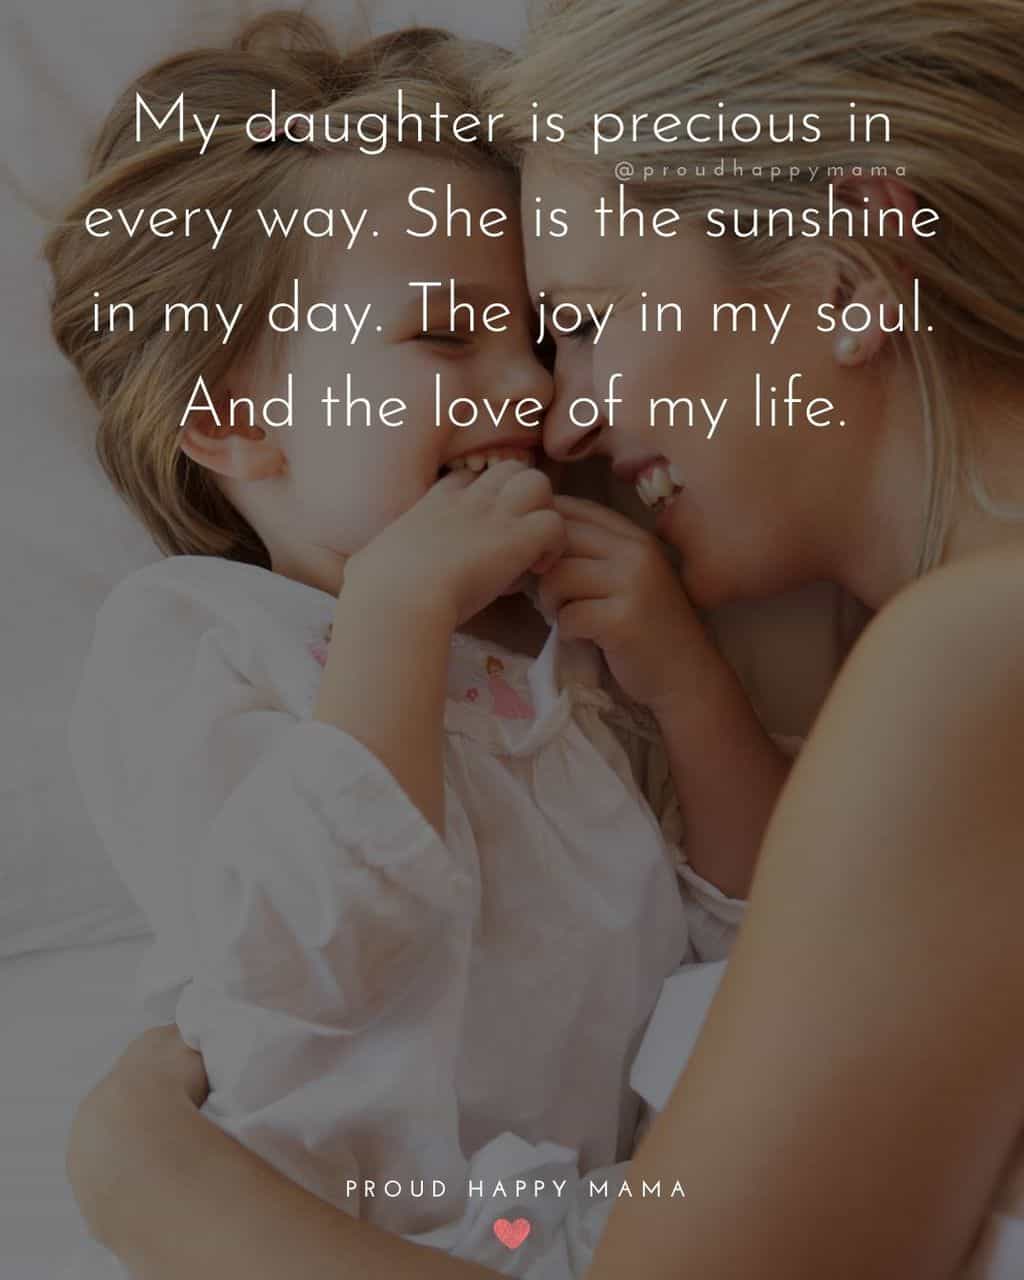 my daughter quotes - My daughter is precious in every way. She is the sunshine in my day. The joy in my soul. And the love of my life.